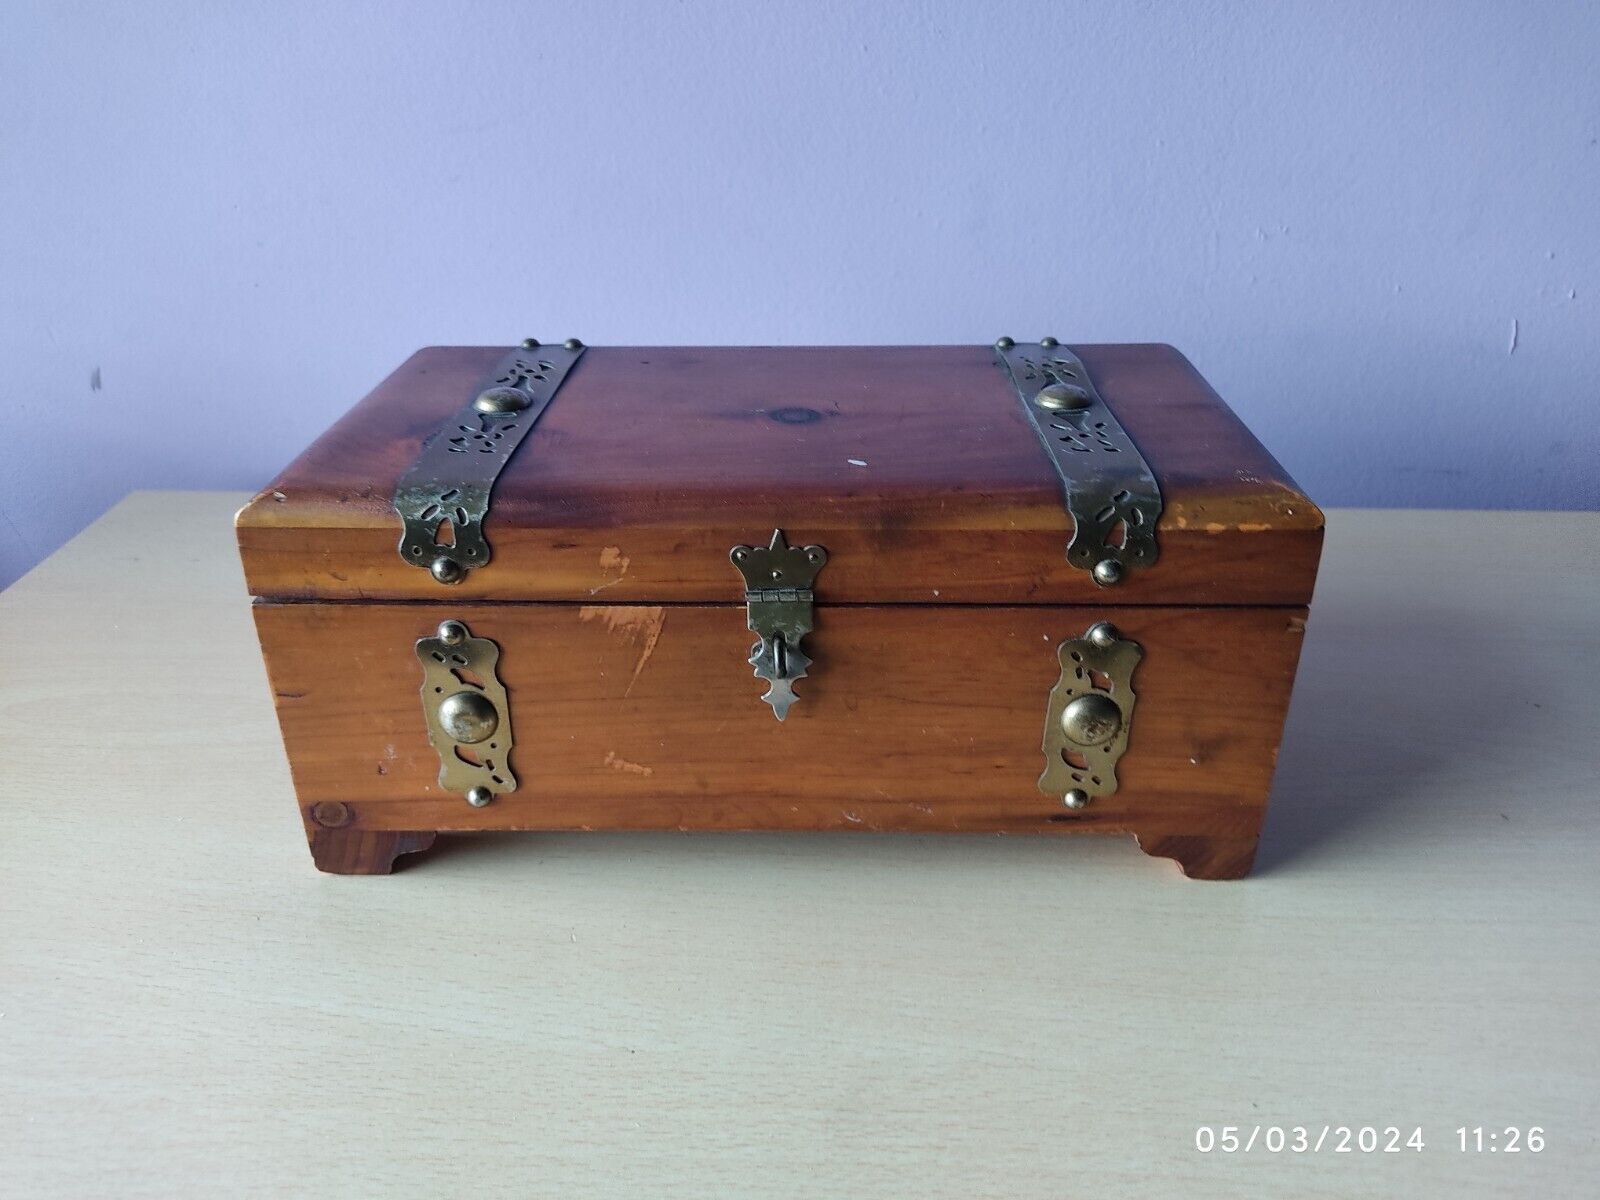 Vintage Cedar Footed Jewelry Box Brass Handles and Accents 10x5x4 in